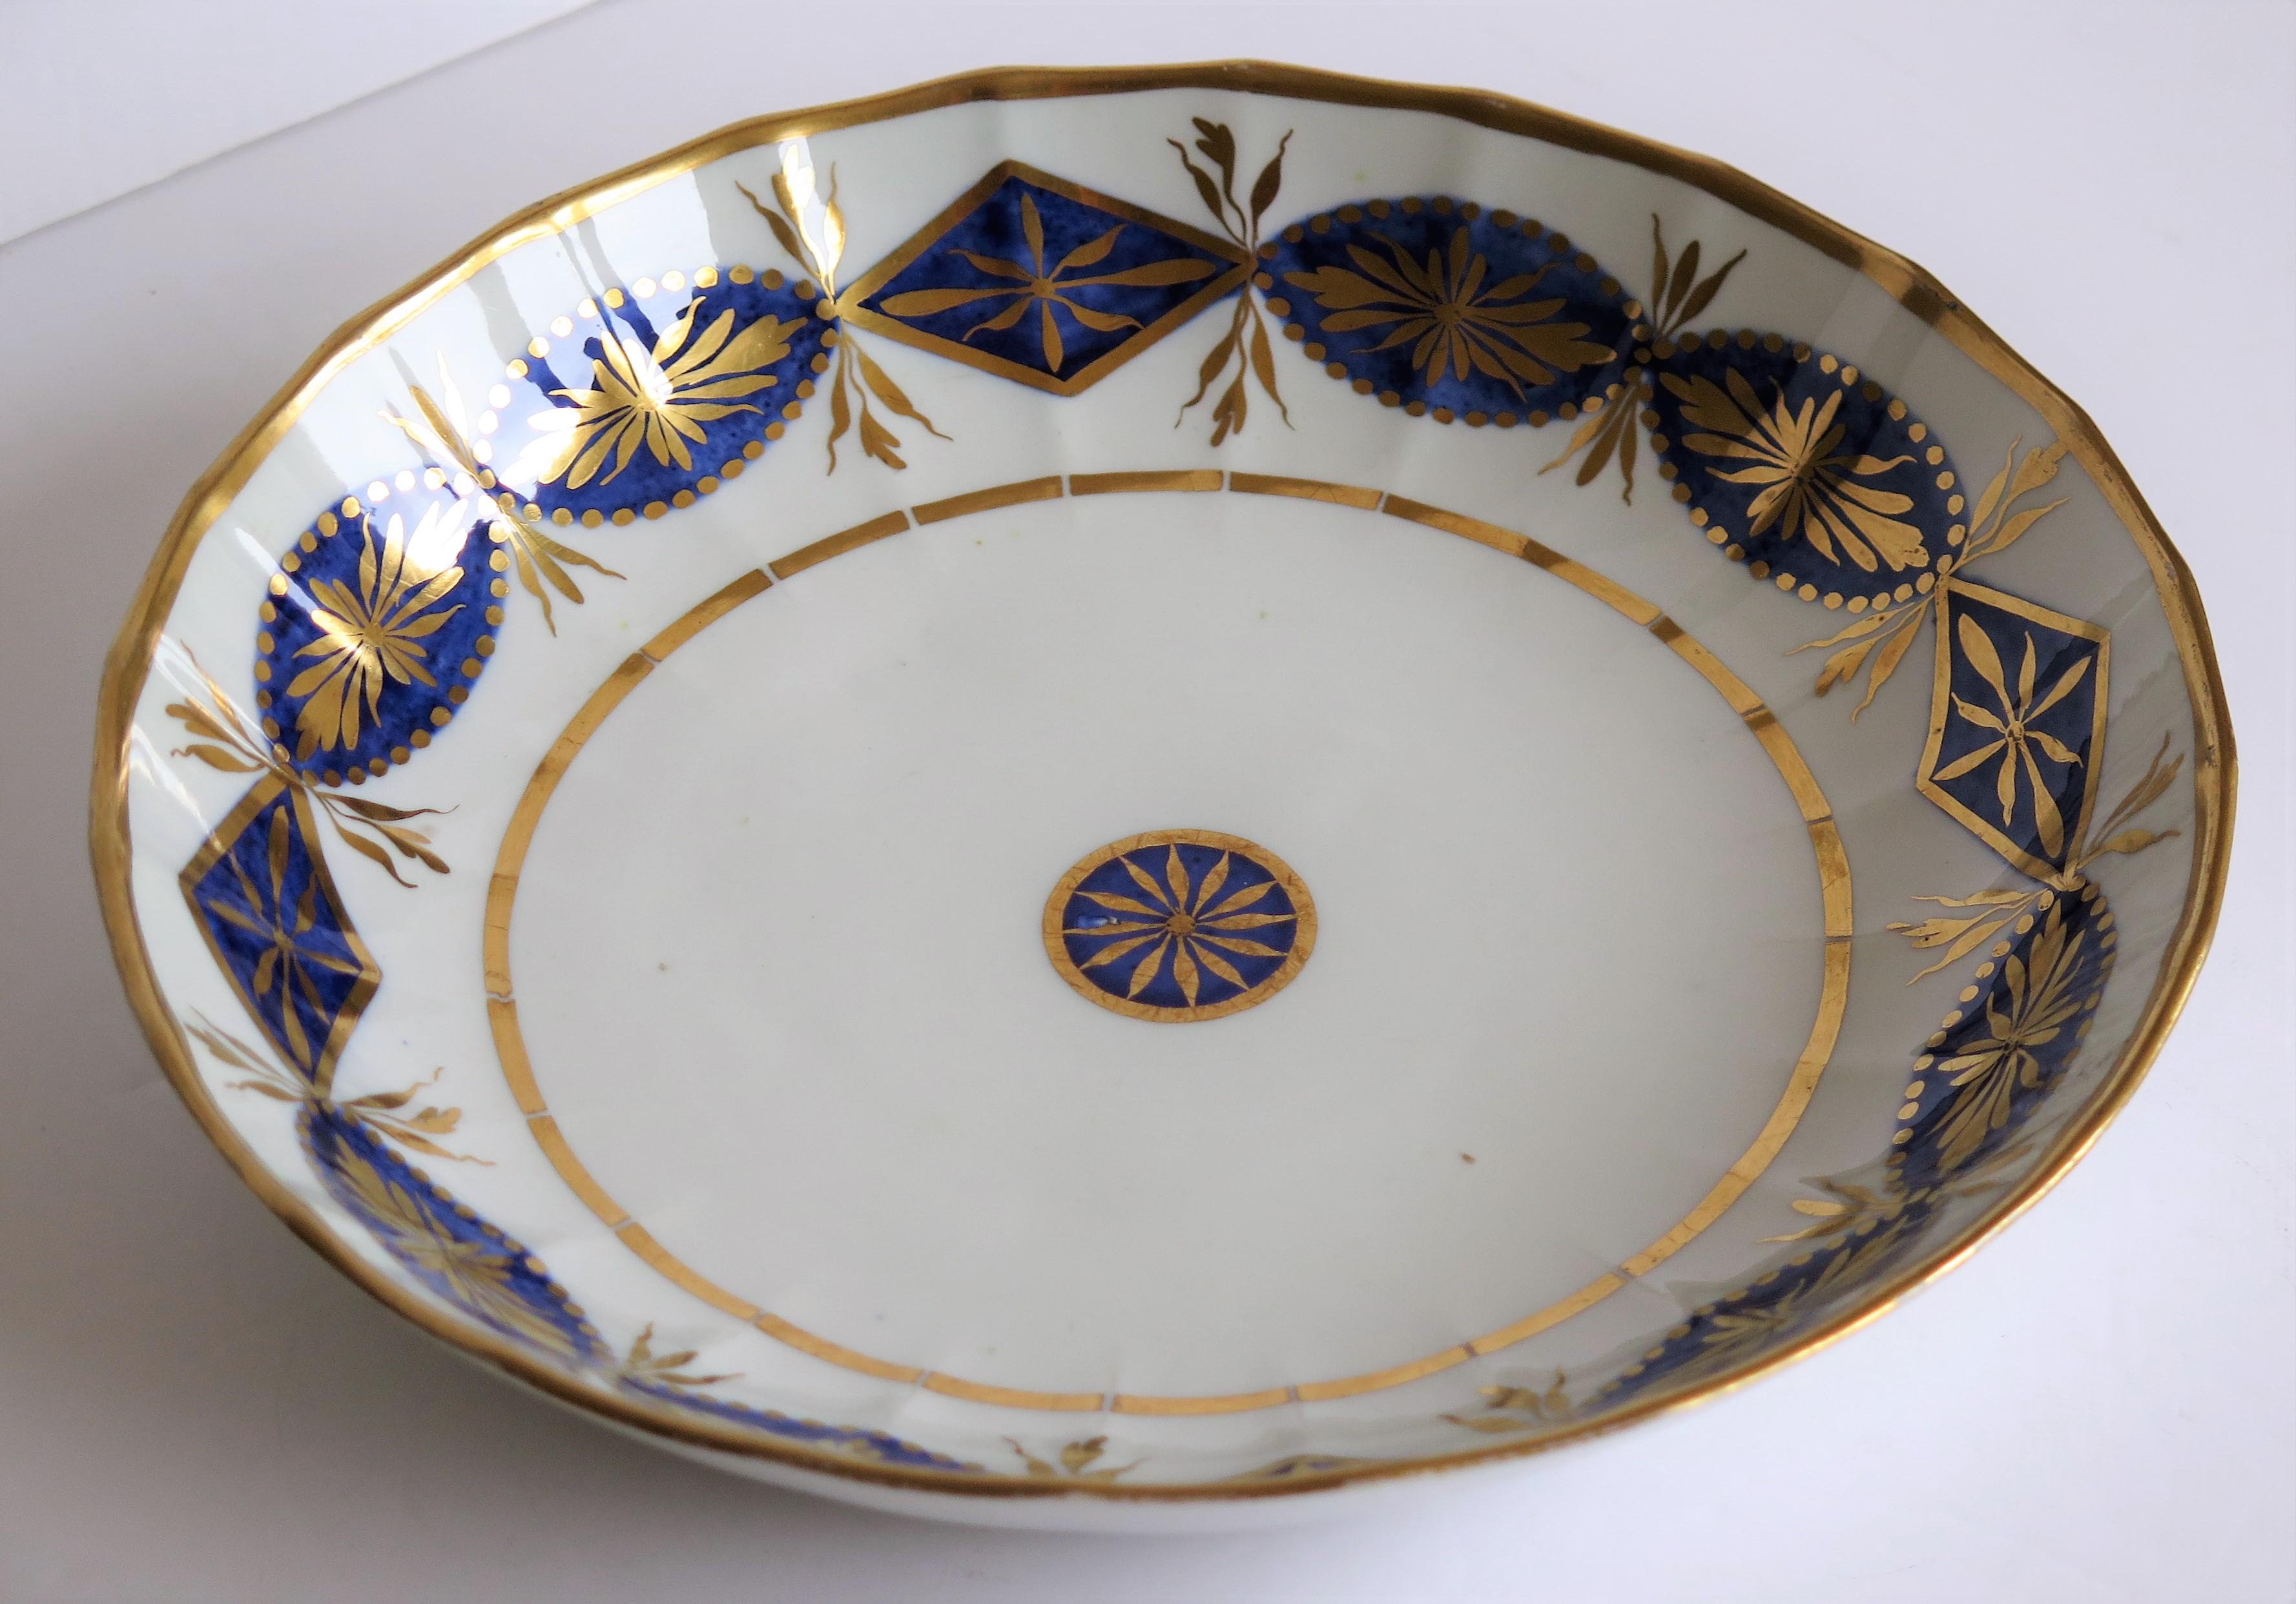 Hand-Painted Miles Mason Porcelain Deep Plate or Dish Mazarine and Gold Pattern circa 1805